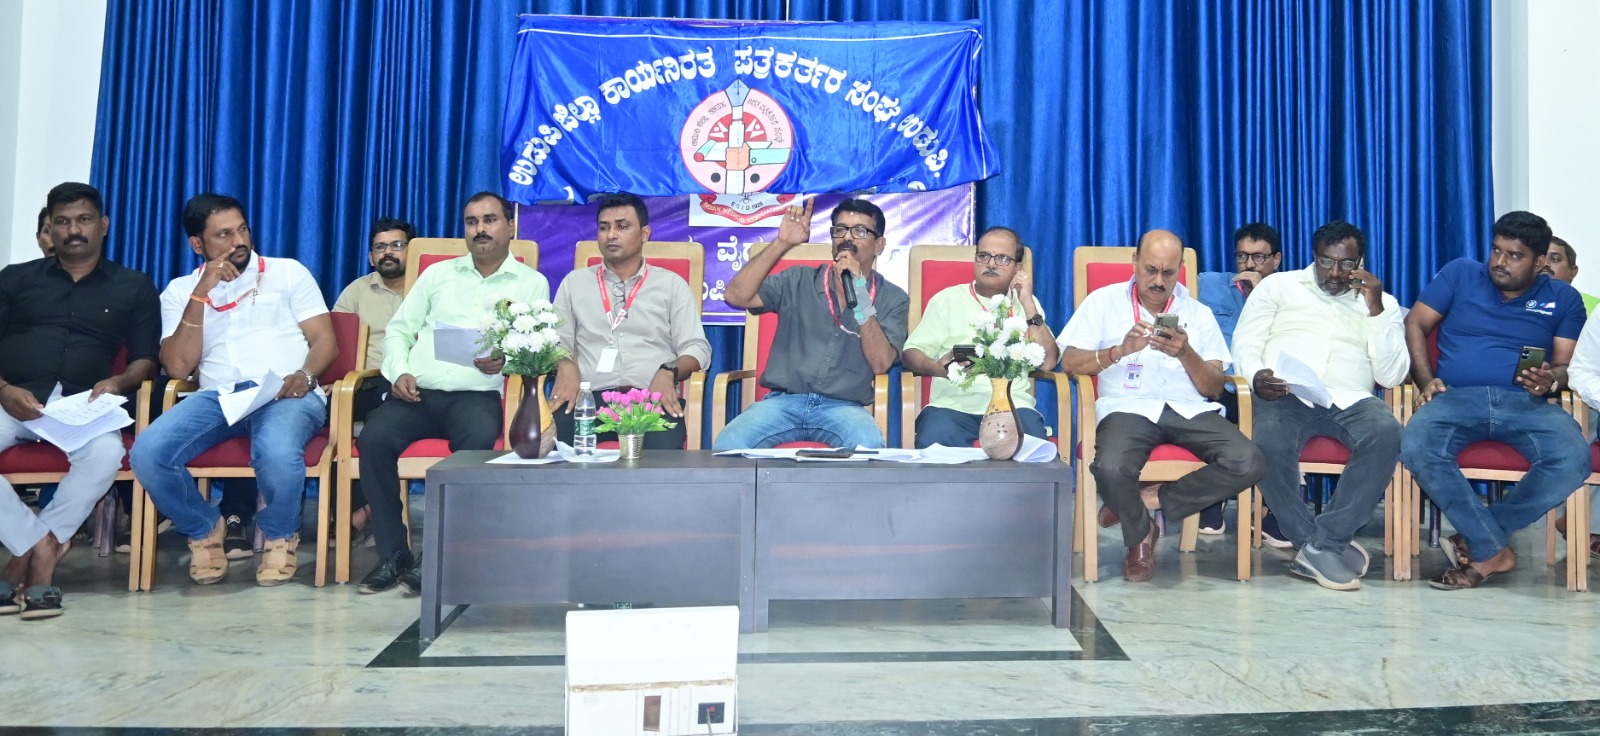 The Annual General meeting of Udupi District Working Journalists Association